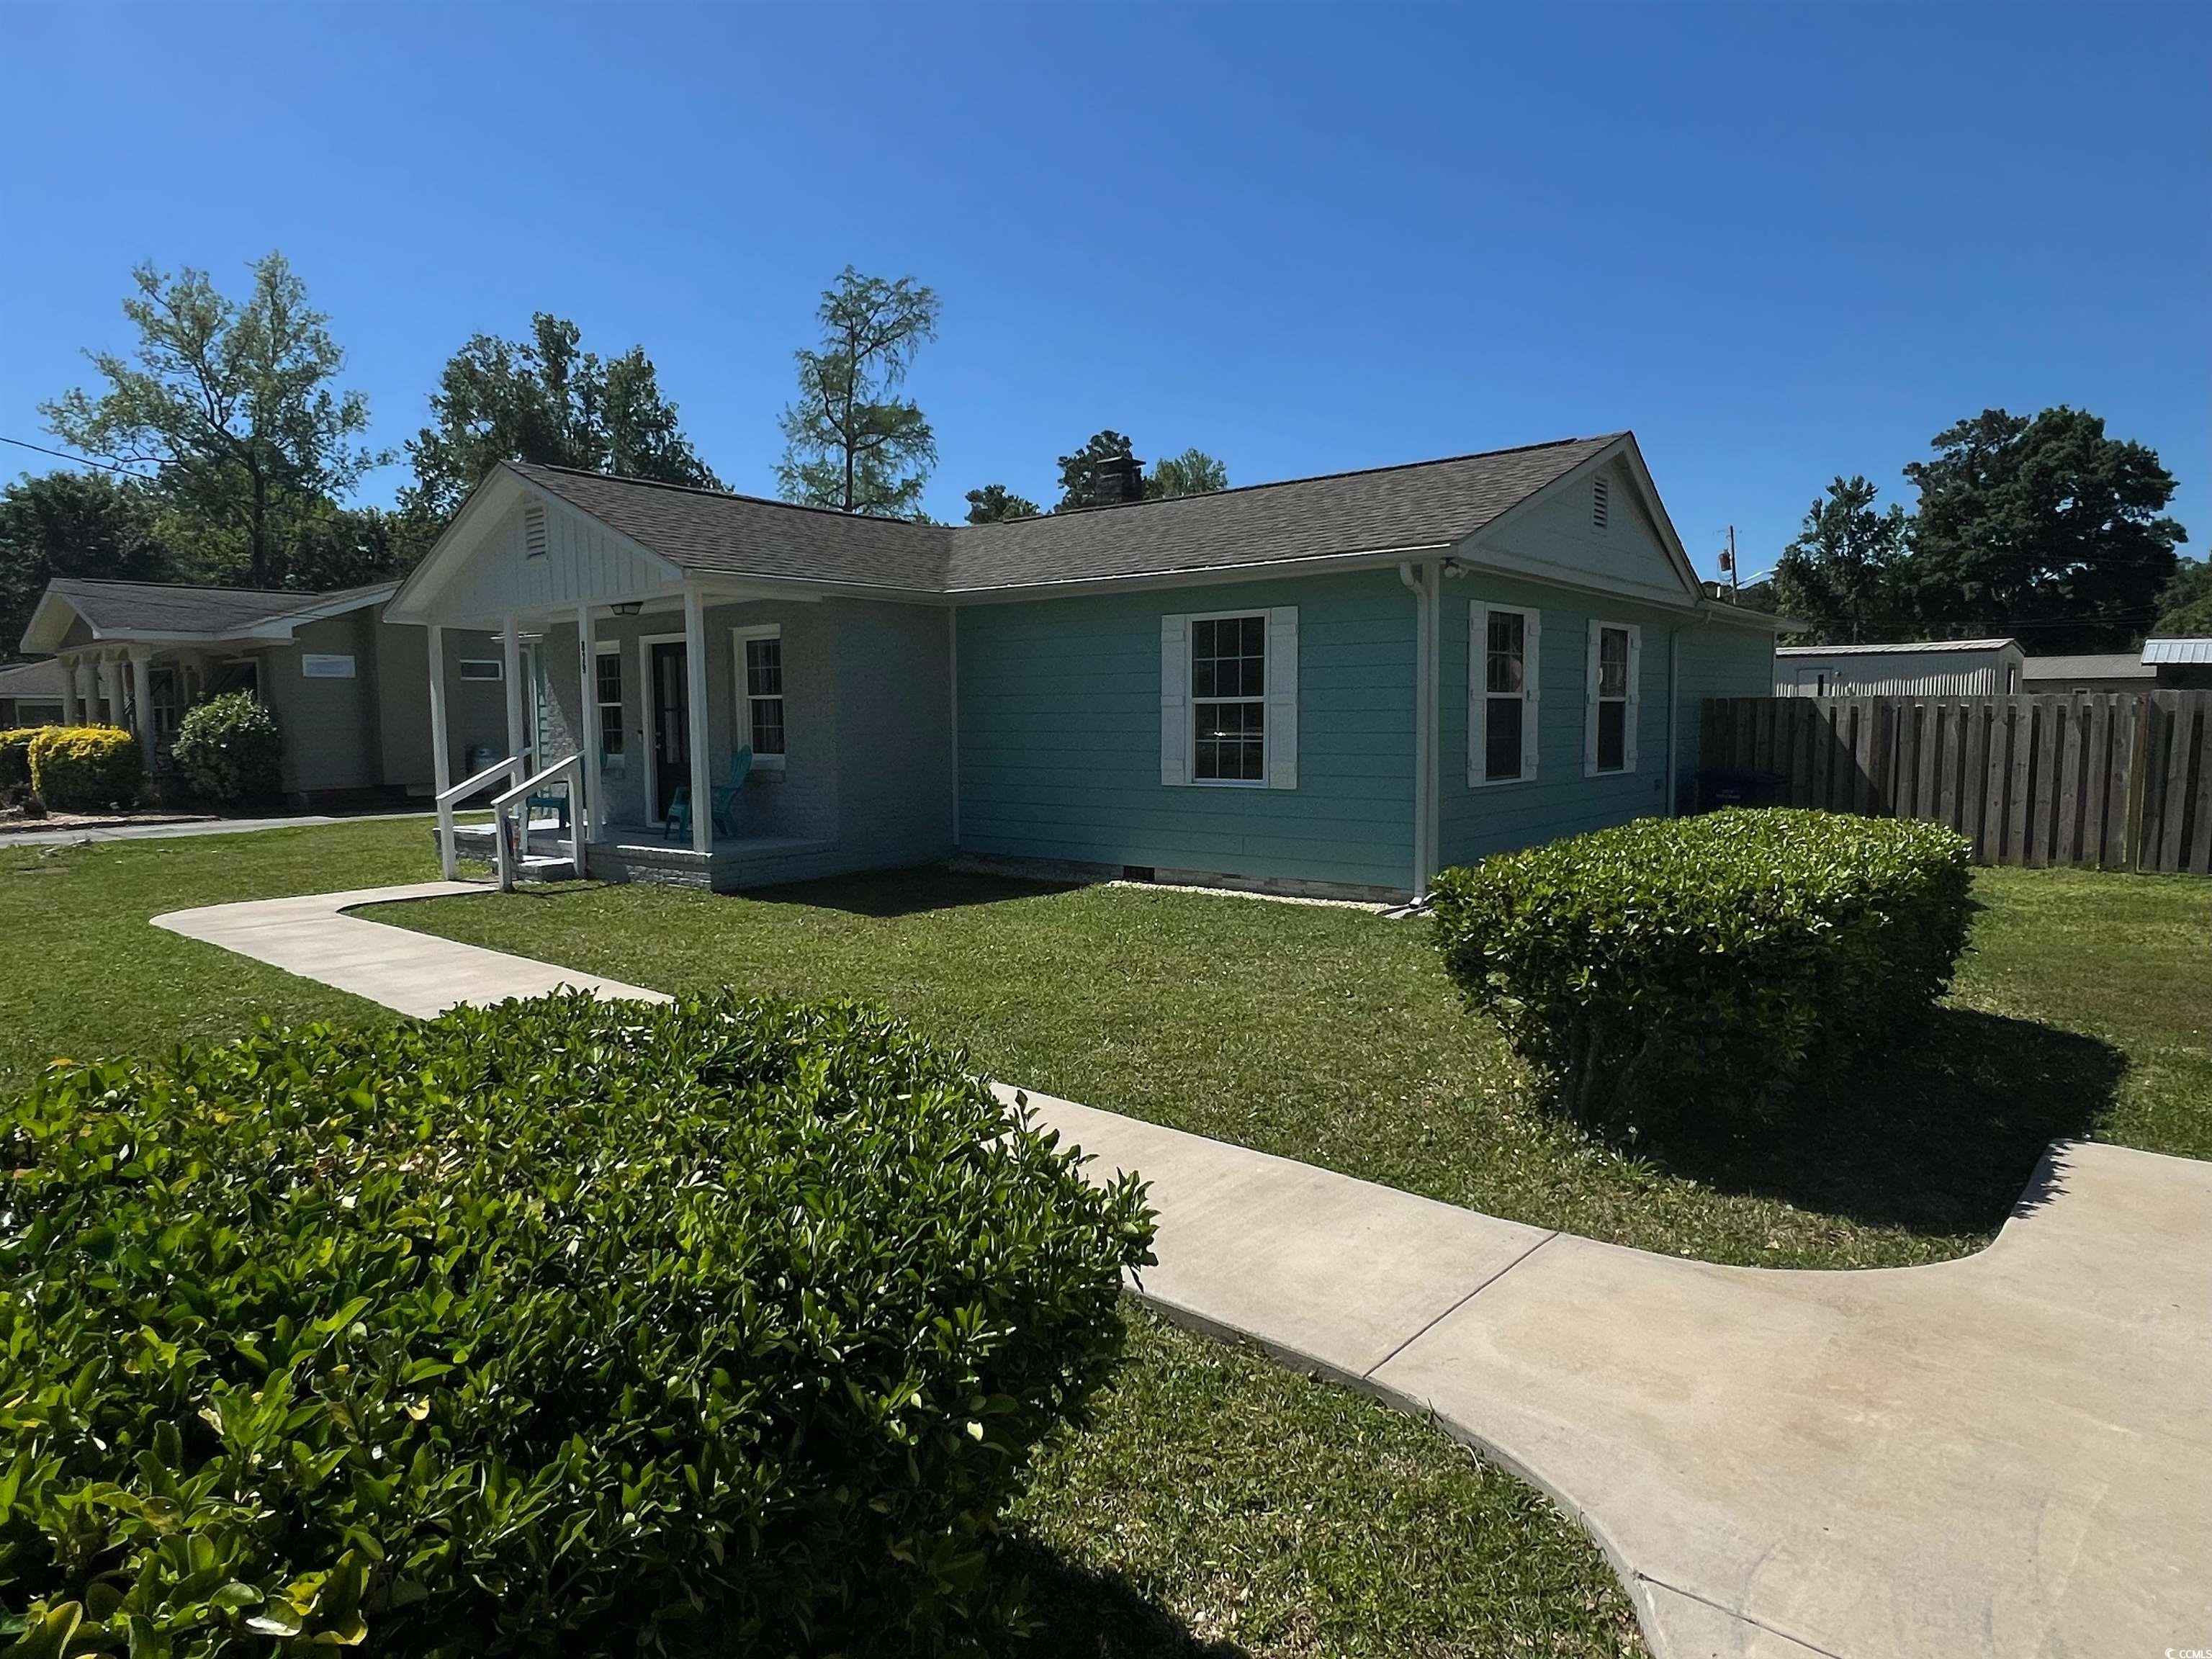 beautifully renovated 2 bedroom 2 bath home just a golf cart ride from the golden mile of myrtle beach!  stainless appliances, solid surface counters, beautifully upgraded bathrooms with tile showers.  roof 2020 and fenced back yard.  see it today!